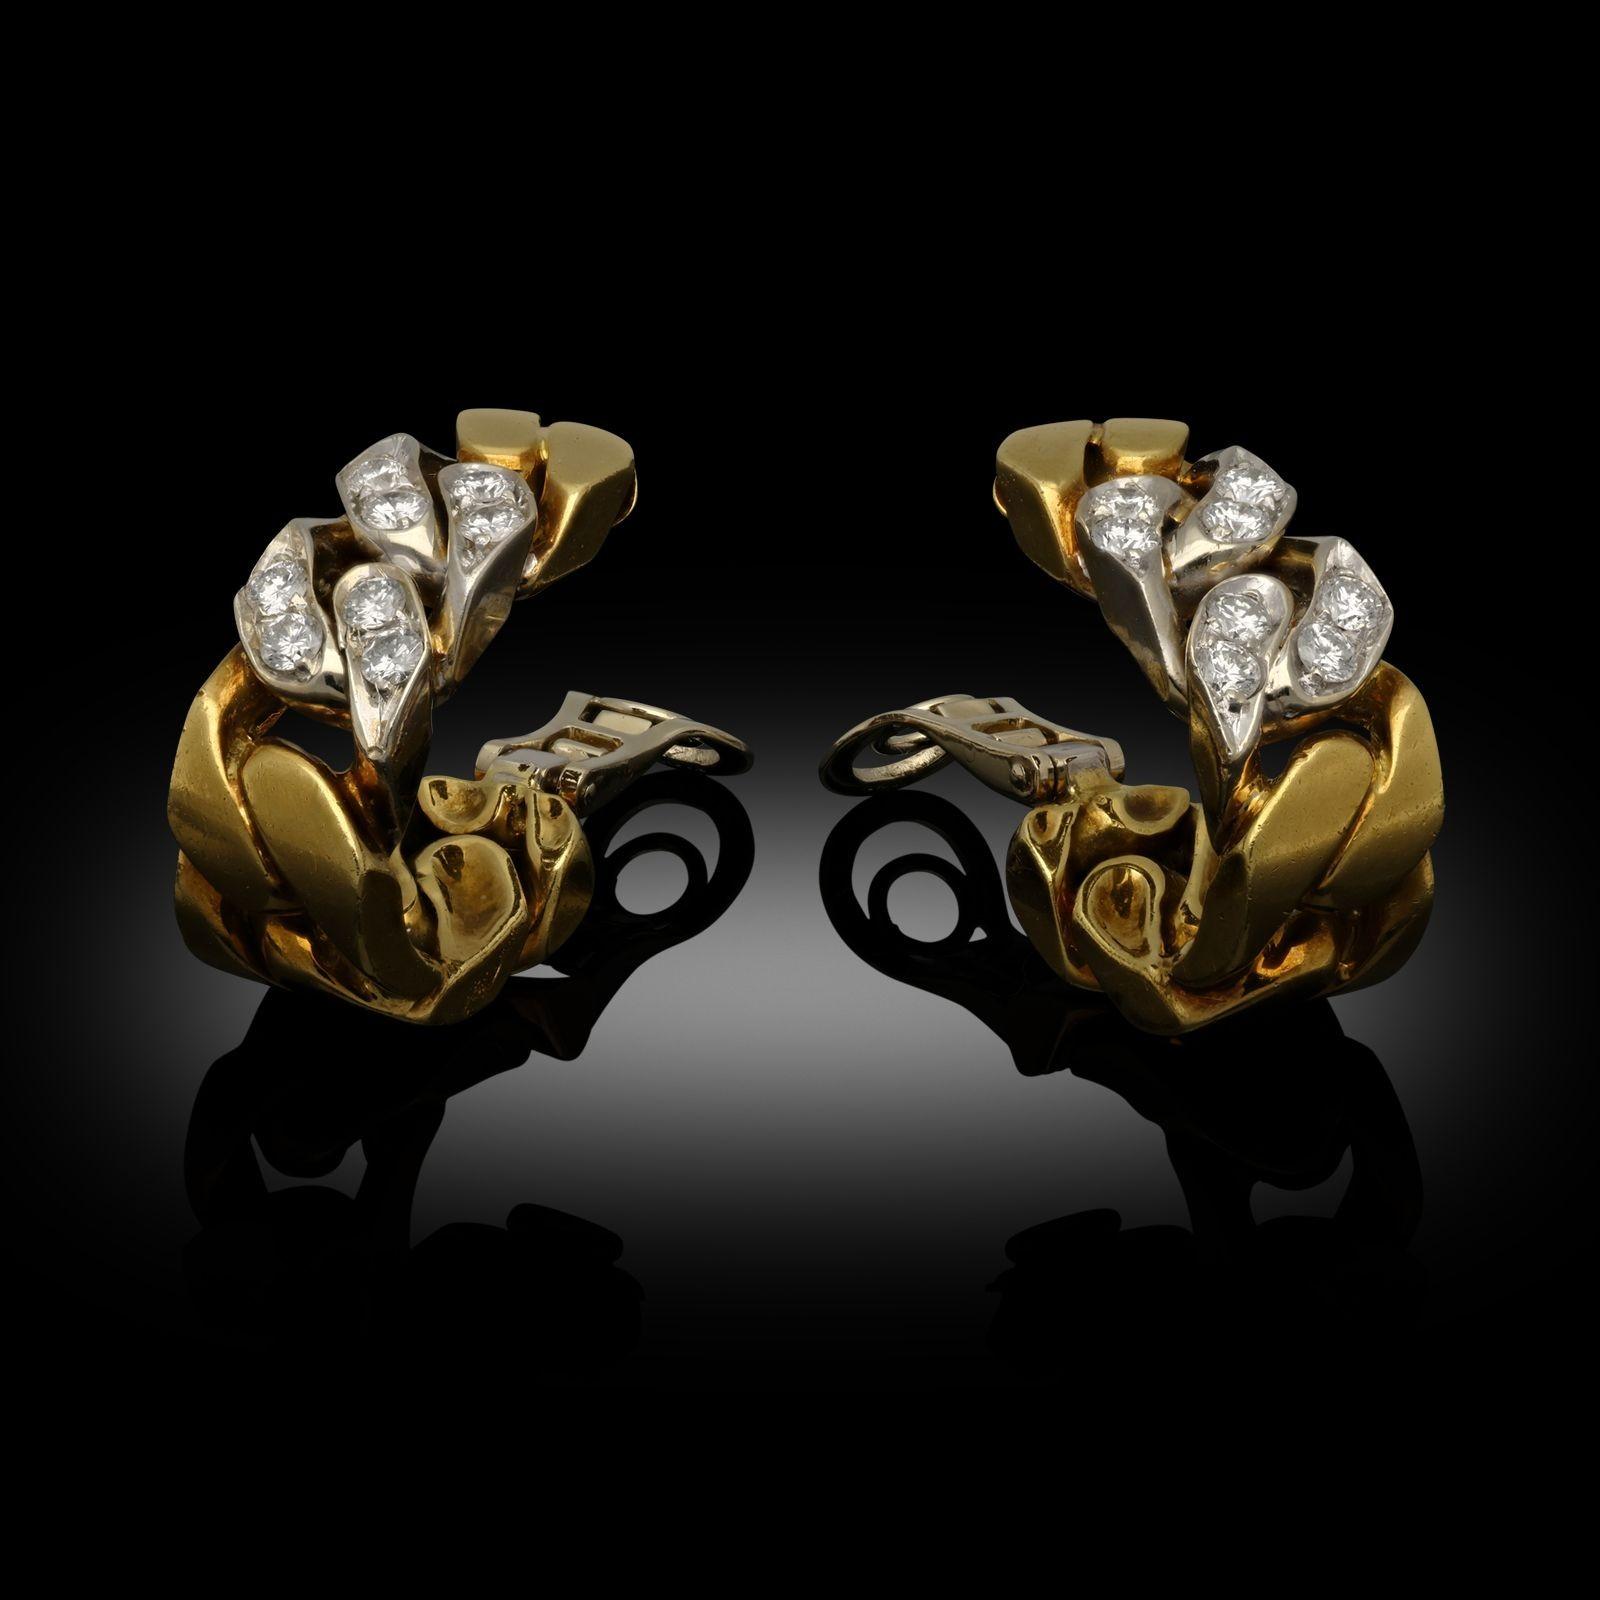 Gold and diamond curb link ear clips by Bulgari c.1970s, of wide flattened curb link chain design in 18ct yellow and white gold, two front links set with round brilliant cut diamonds, to hinged clip fittings.
Maker
Bulgari
Period
Circa